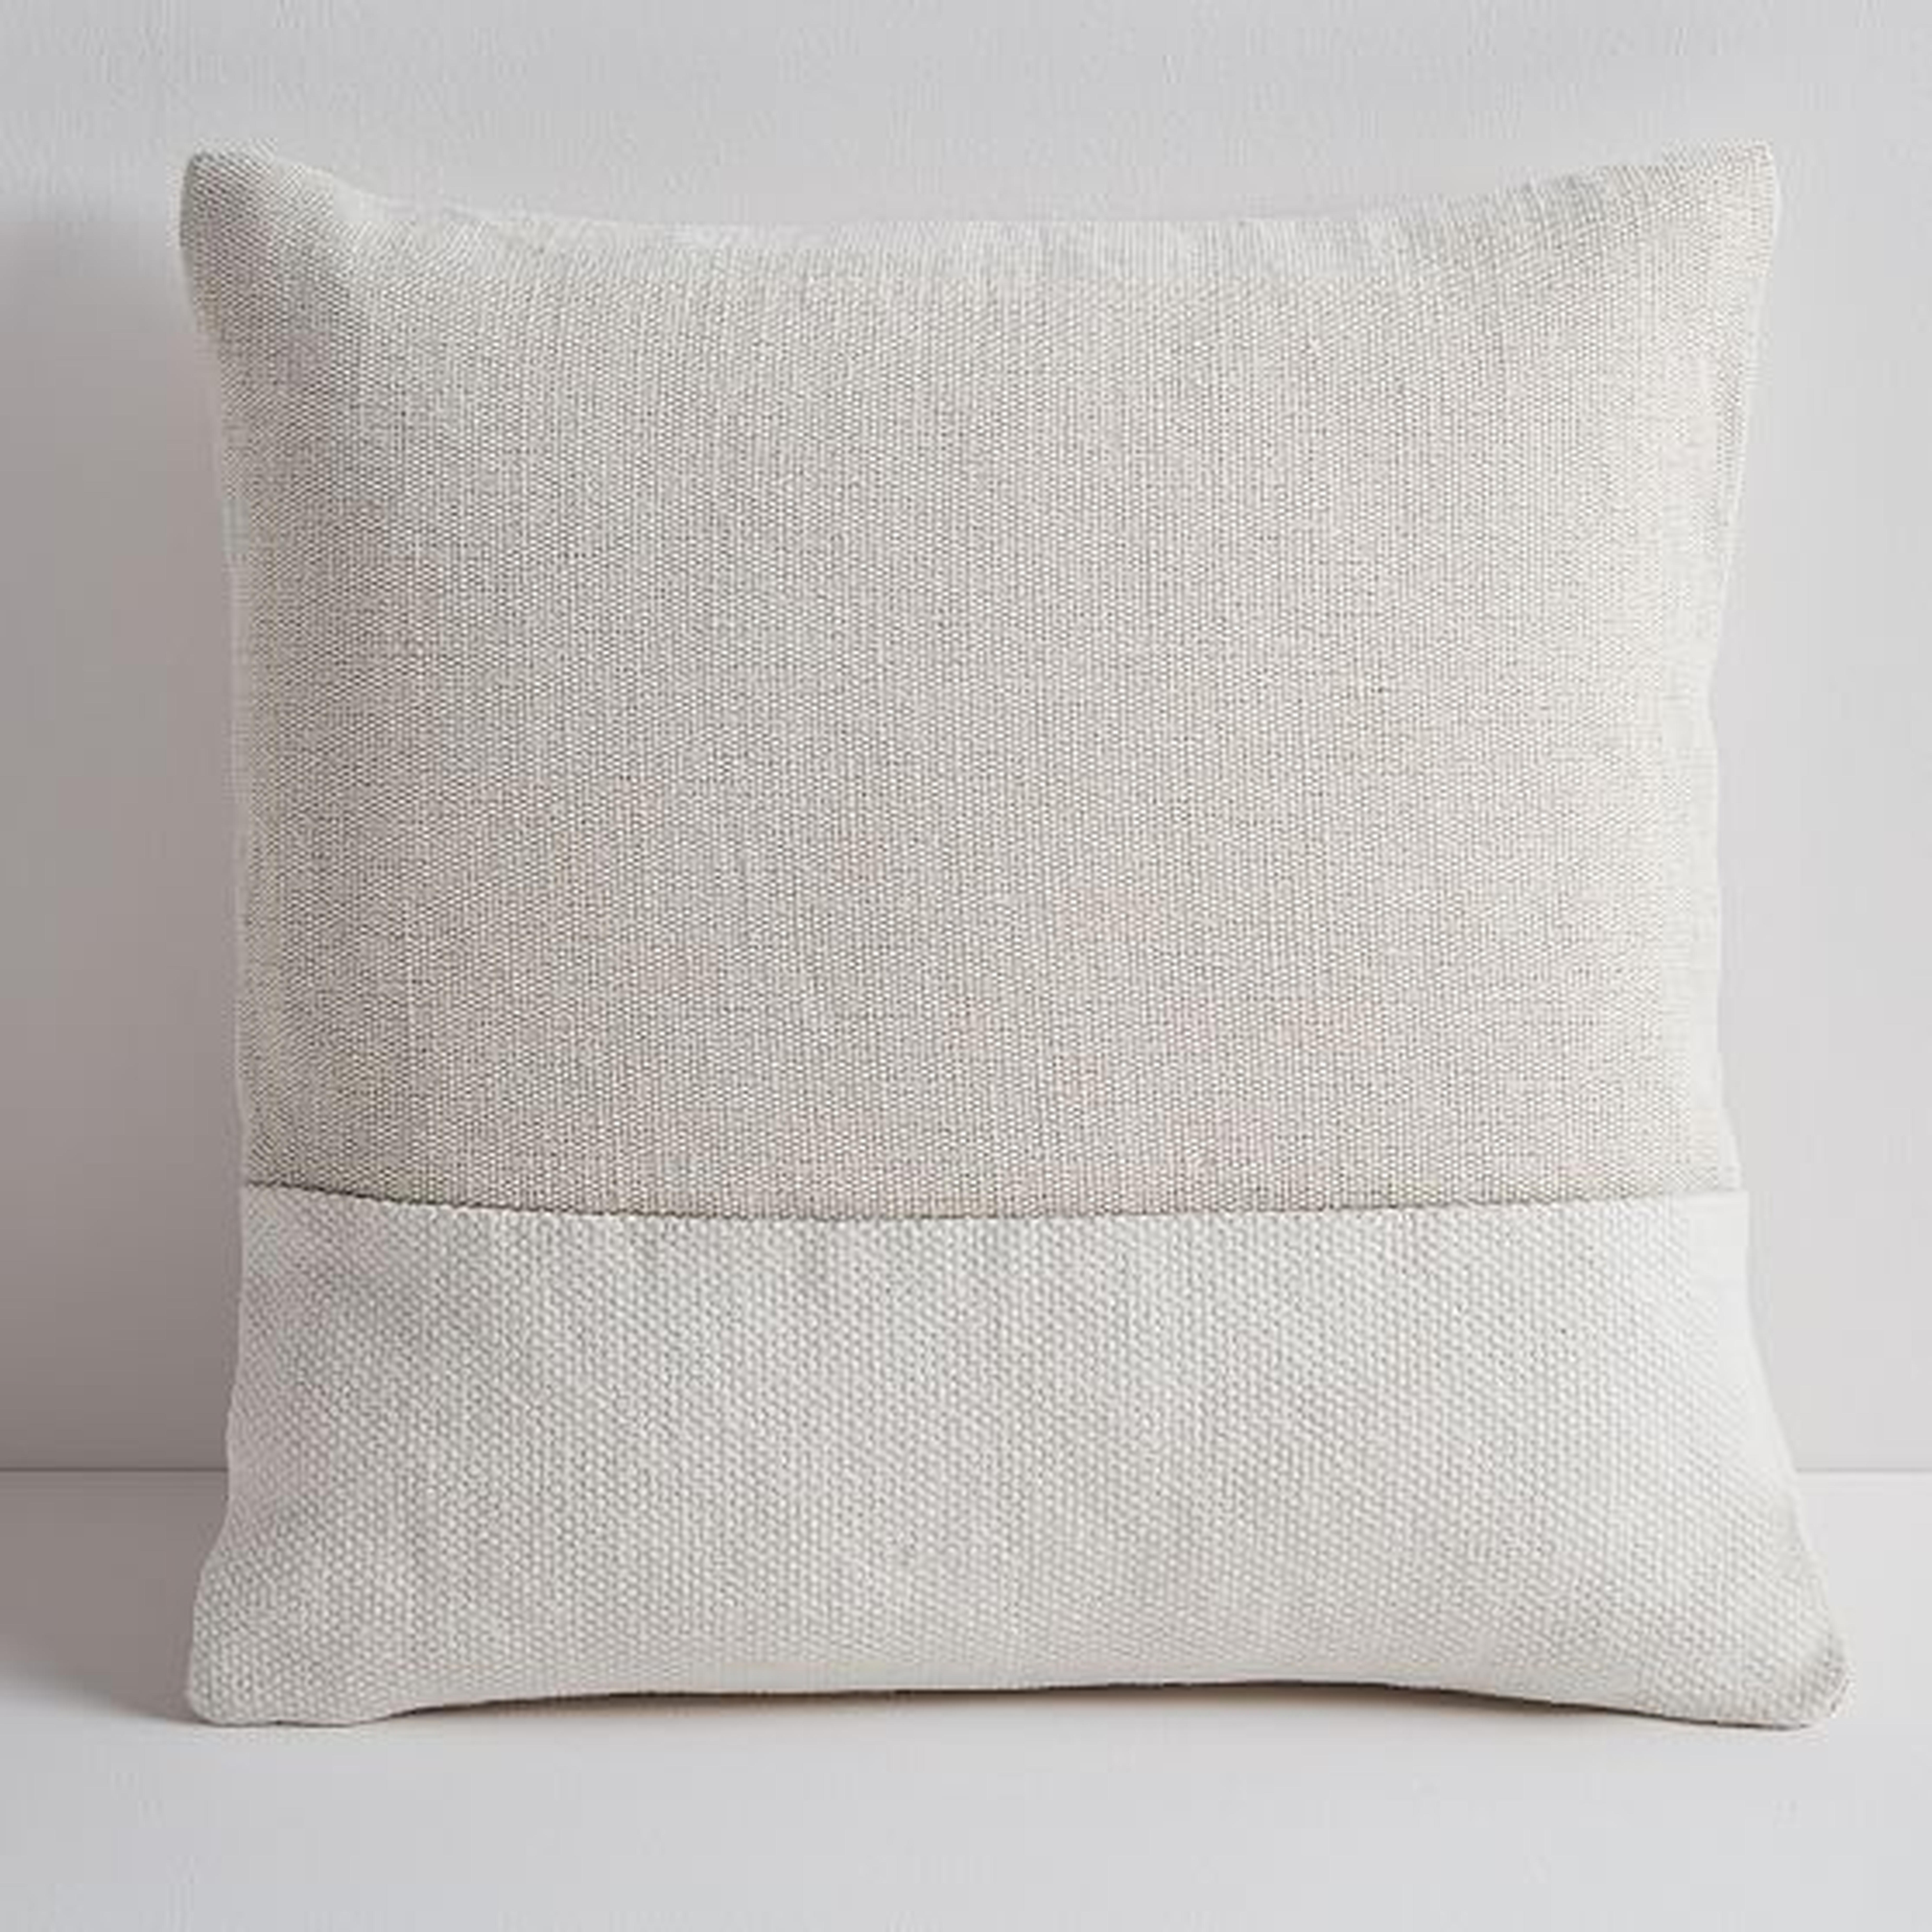 Cotton Canvas Pillow Cover with Down Alternative Insert, Stone White, 18"x18" - West Elm